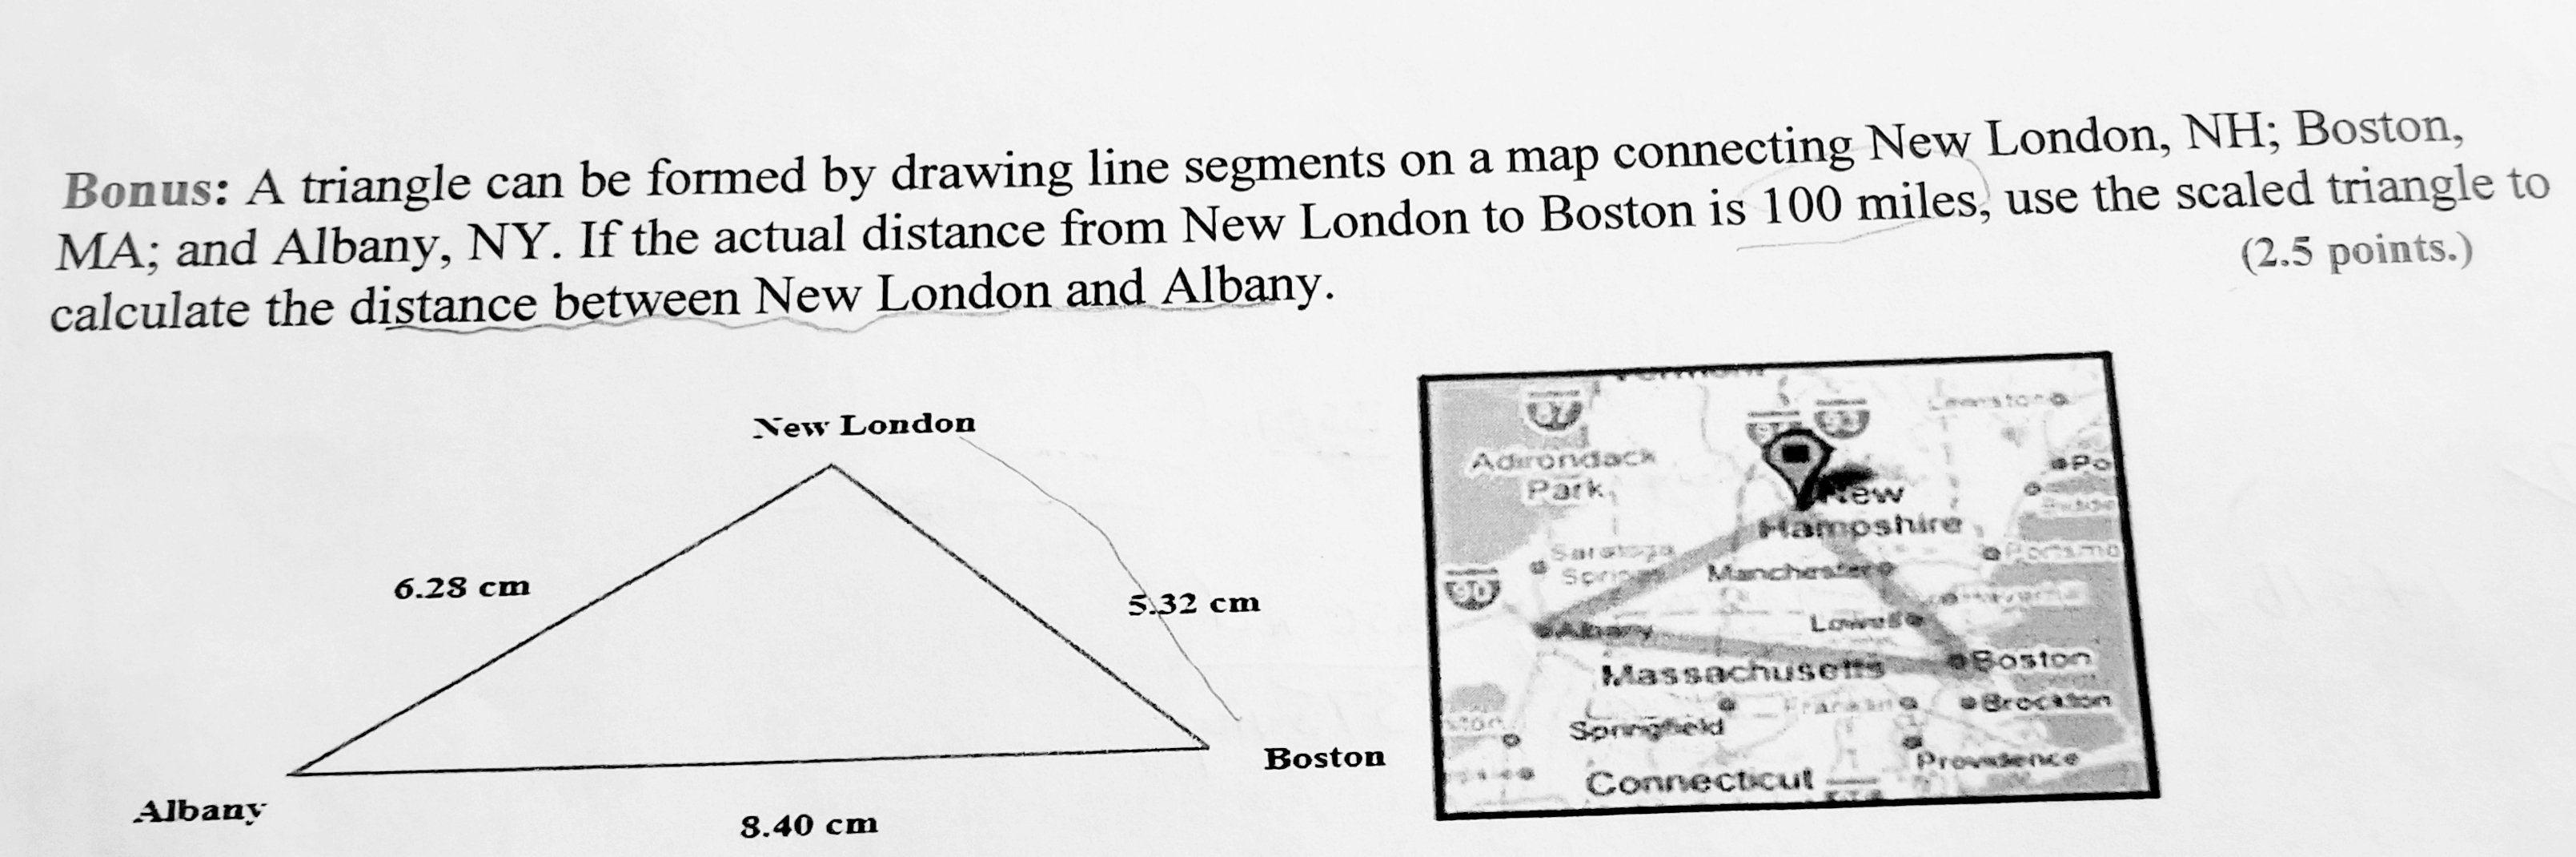 Bonus: A triangle can be formed by drawing line segments on a map connecting New London, NH; Boston,
MA; and Albany, NY. If the actual distance from New London to Boston is 100 miles, use the scaled triangle to
calculate the distance between New London and Albany.
(2.5 points.)
New London
Adhroviack
ew
Hampshire
6.28 cm
5.32 cm
Low
Boston
aBrecaton
Massachuset圬
Boston
Connecticut
Albany
8.40 cm
